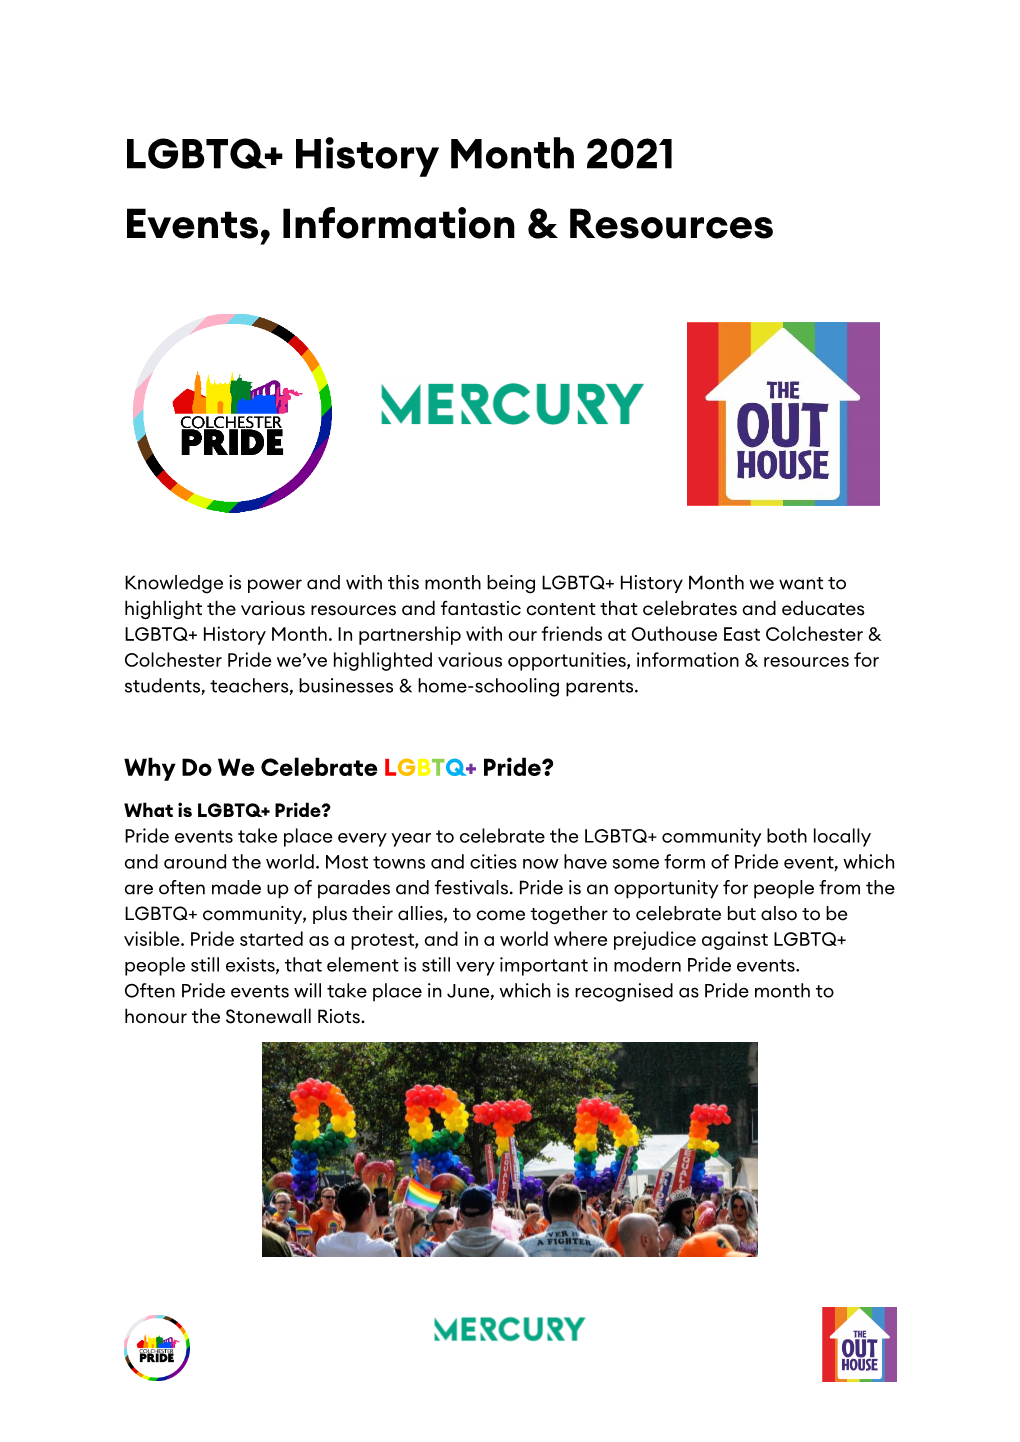 LGBTQ+ History Month 2021 Events, Information & Resources